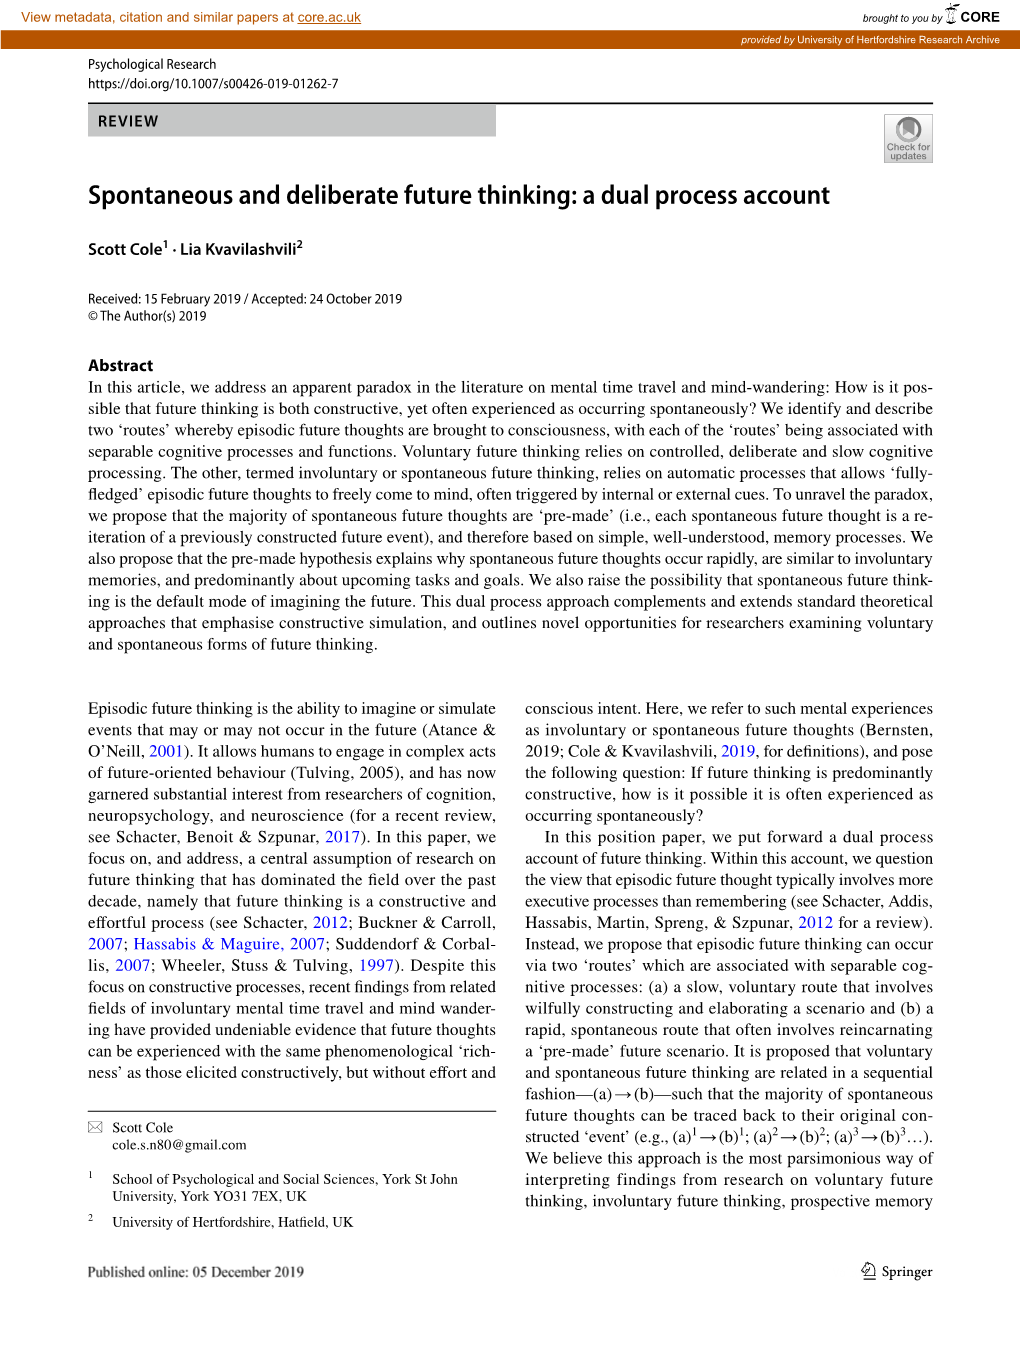 Spontaneous and Deliberate Future Thinking: a Dual Process Account